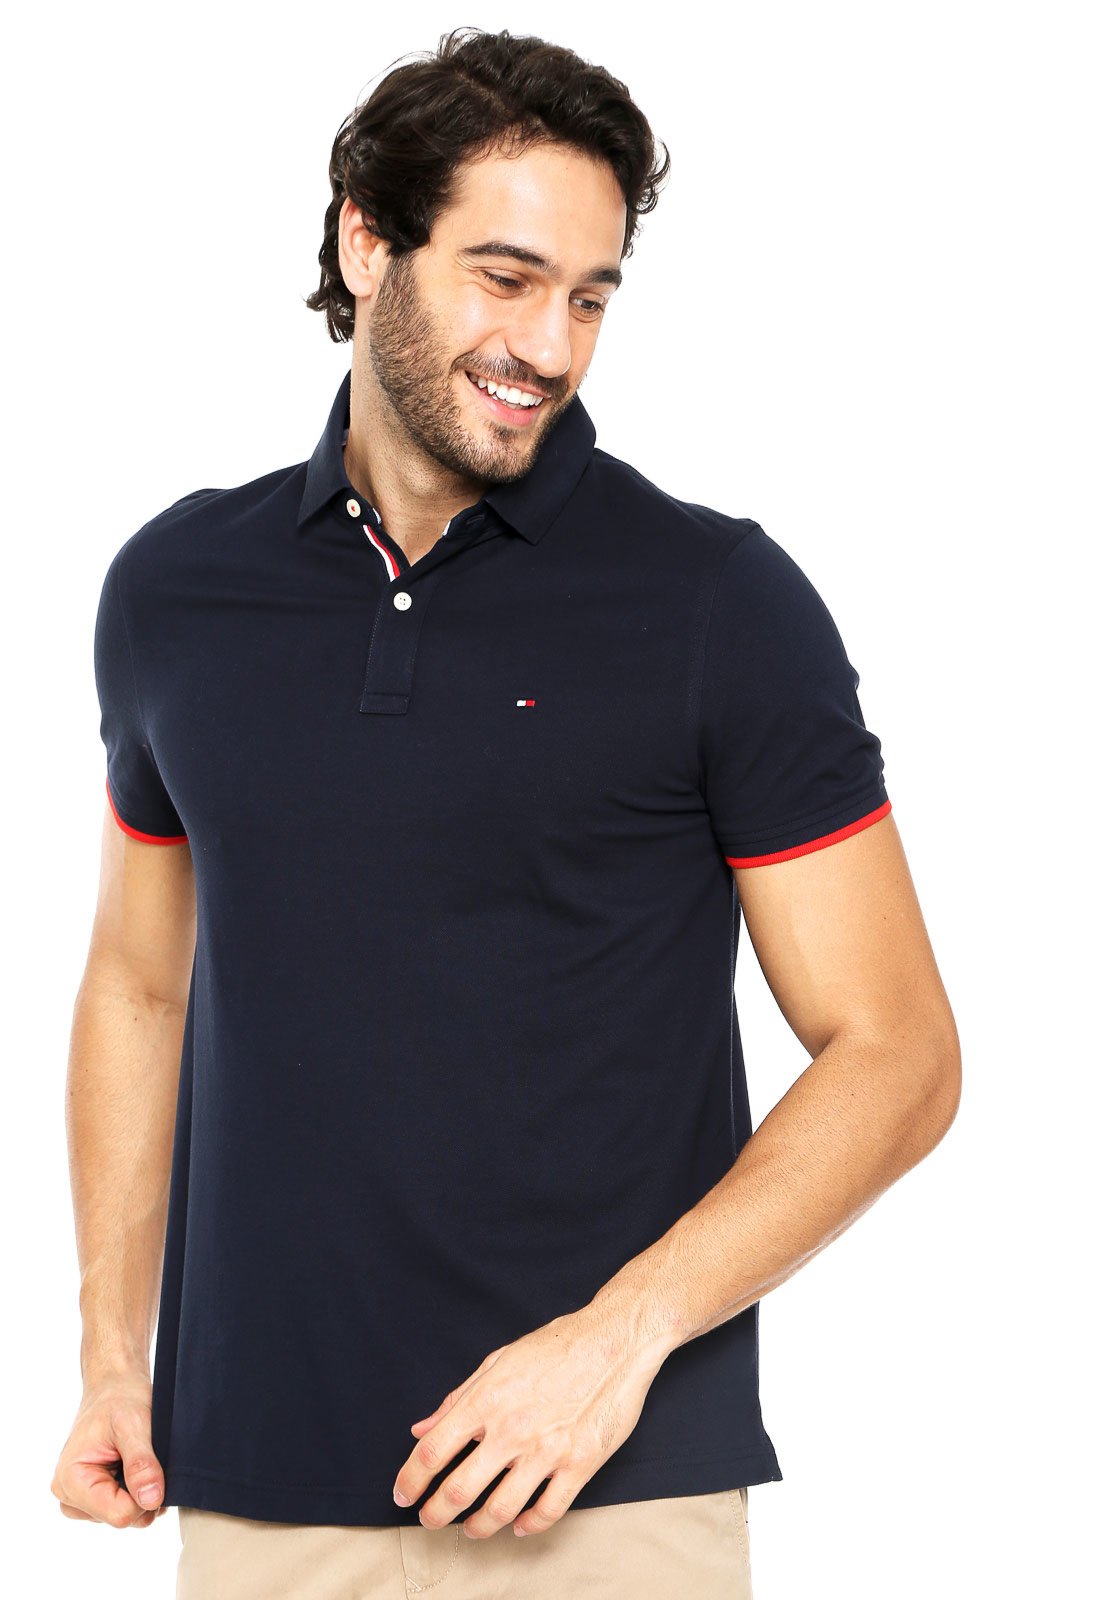 Camisa Polo Tommy Hilfiger Czech Republic, SAVE 40%, 58% OFF